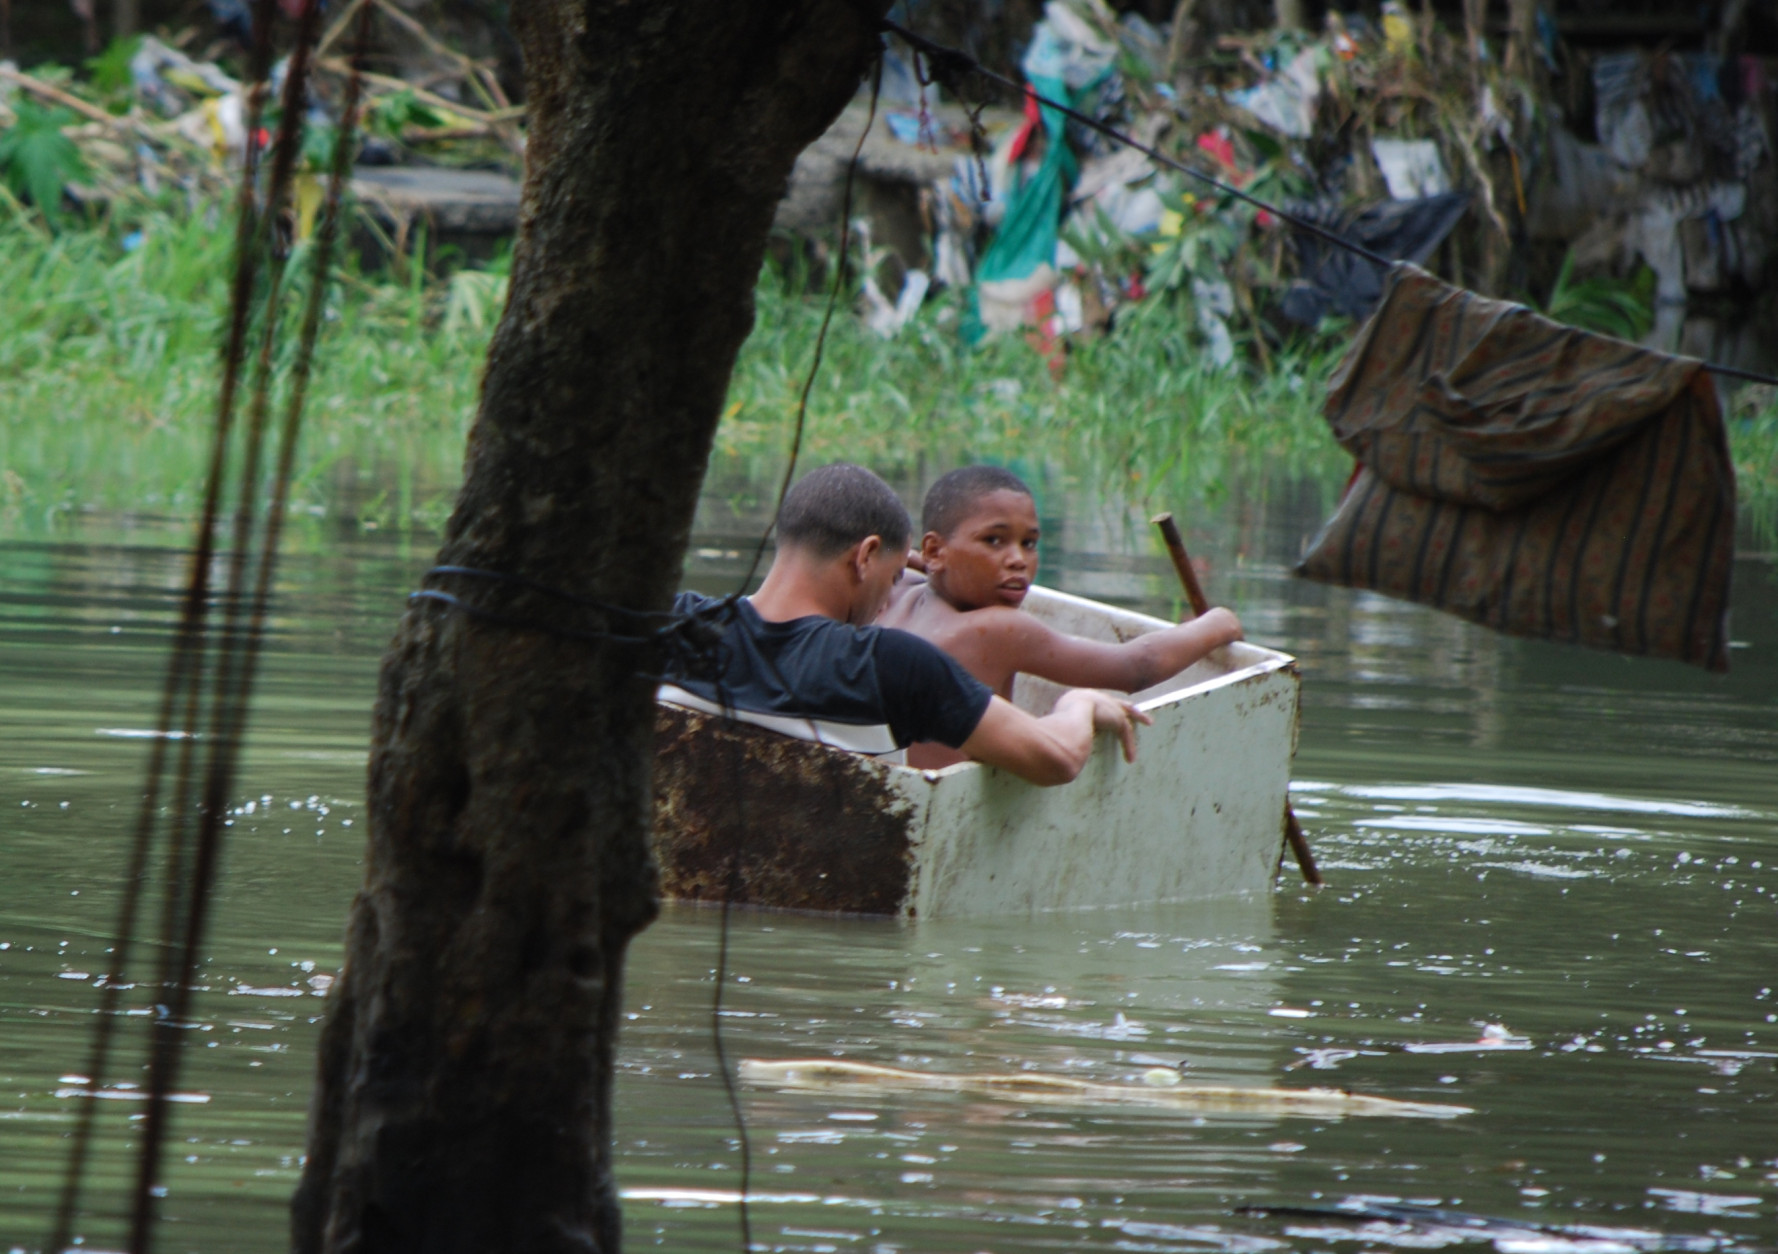 Two boys float in an old wooden box in an area flooded by heavy rains caused by Hurricane Matthew, in La Puya slum, in the Arroyo Hondo creek in Santo Domingo, Dominican Republic, Tuesday, Oct. 4, 2016. Matthew roared into the southwestern coast of the island of Hispaniola with devastating storm conditions as it headed north toward Cuba and the eastern coast of Florida. (AP Photo/Ezequiel Abiu Lopez)